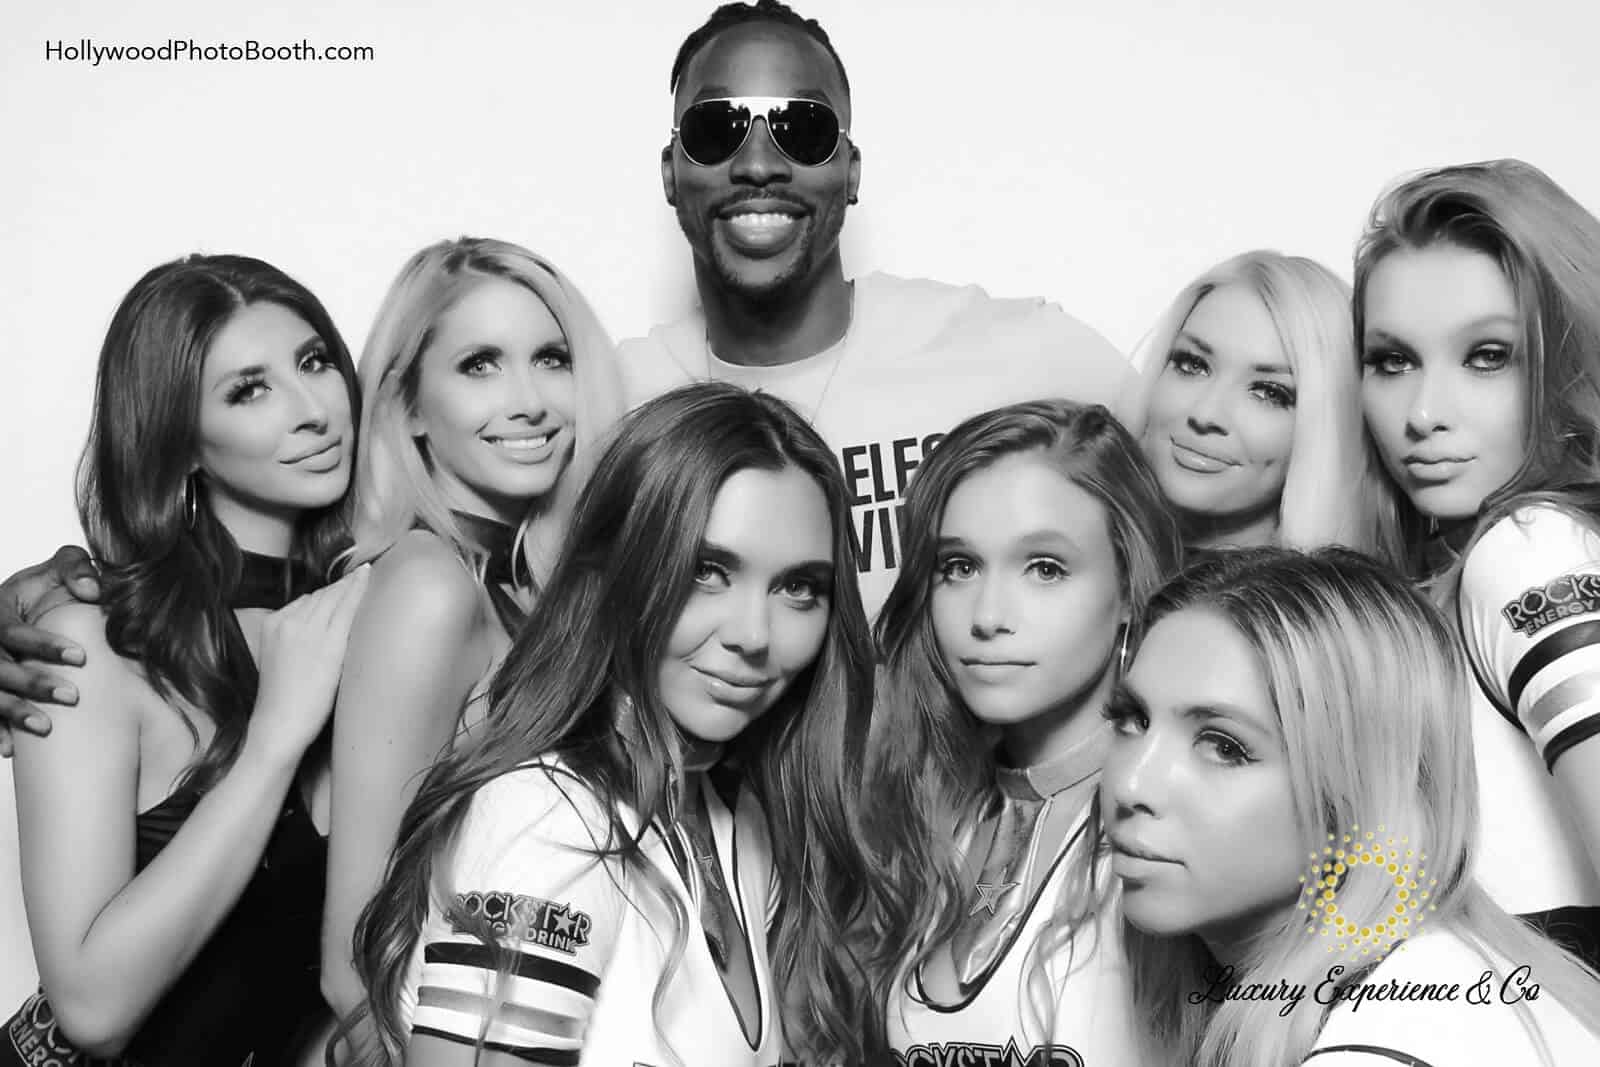 Black and white beauty booth with glam filter, Dwight Howard, Lakers, RockStar Energy Drink, San Diego, Los Angeles, San Francisco, Las Vegas, New York City, Hollywood Photo Booth  SD - LA - SF - LV - NYC Studios